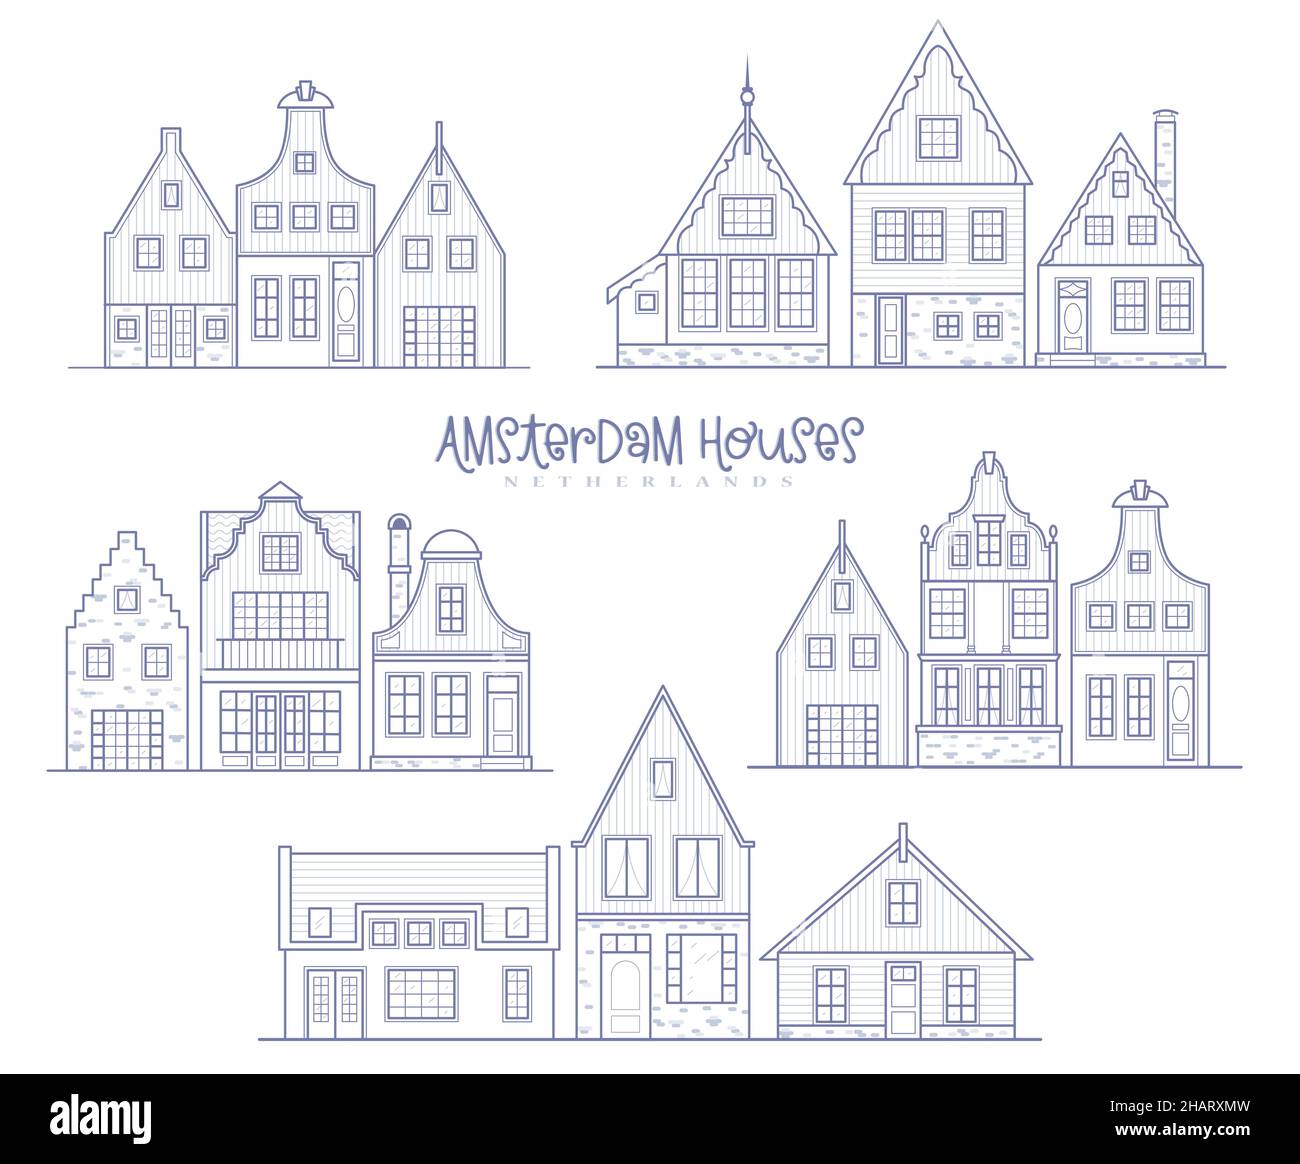 Groups of Amsterdam houses. Facades of European old buildings. Holland homes. Vector set outline illustration. Stock Vector